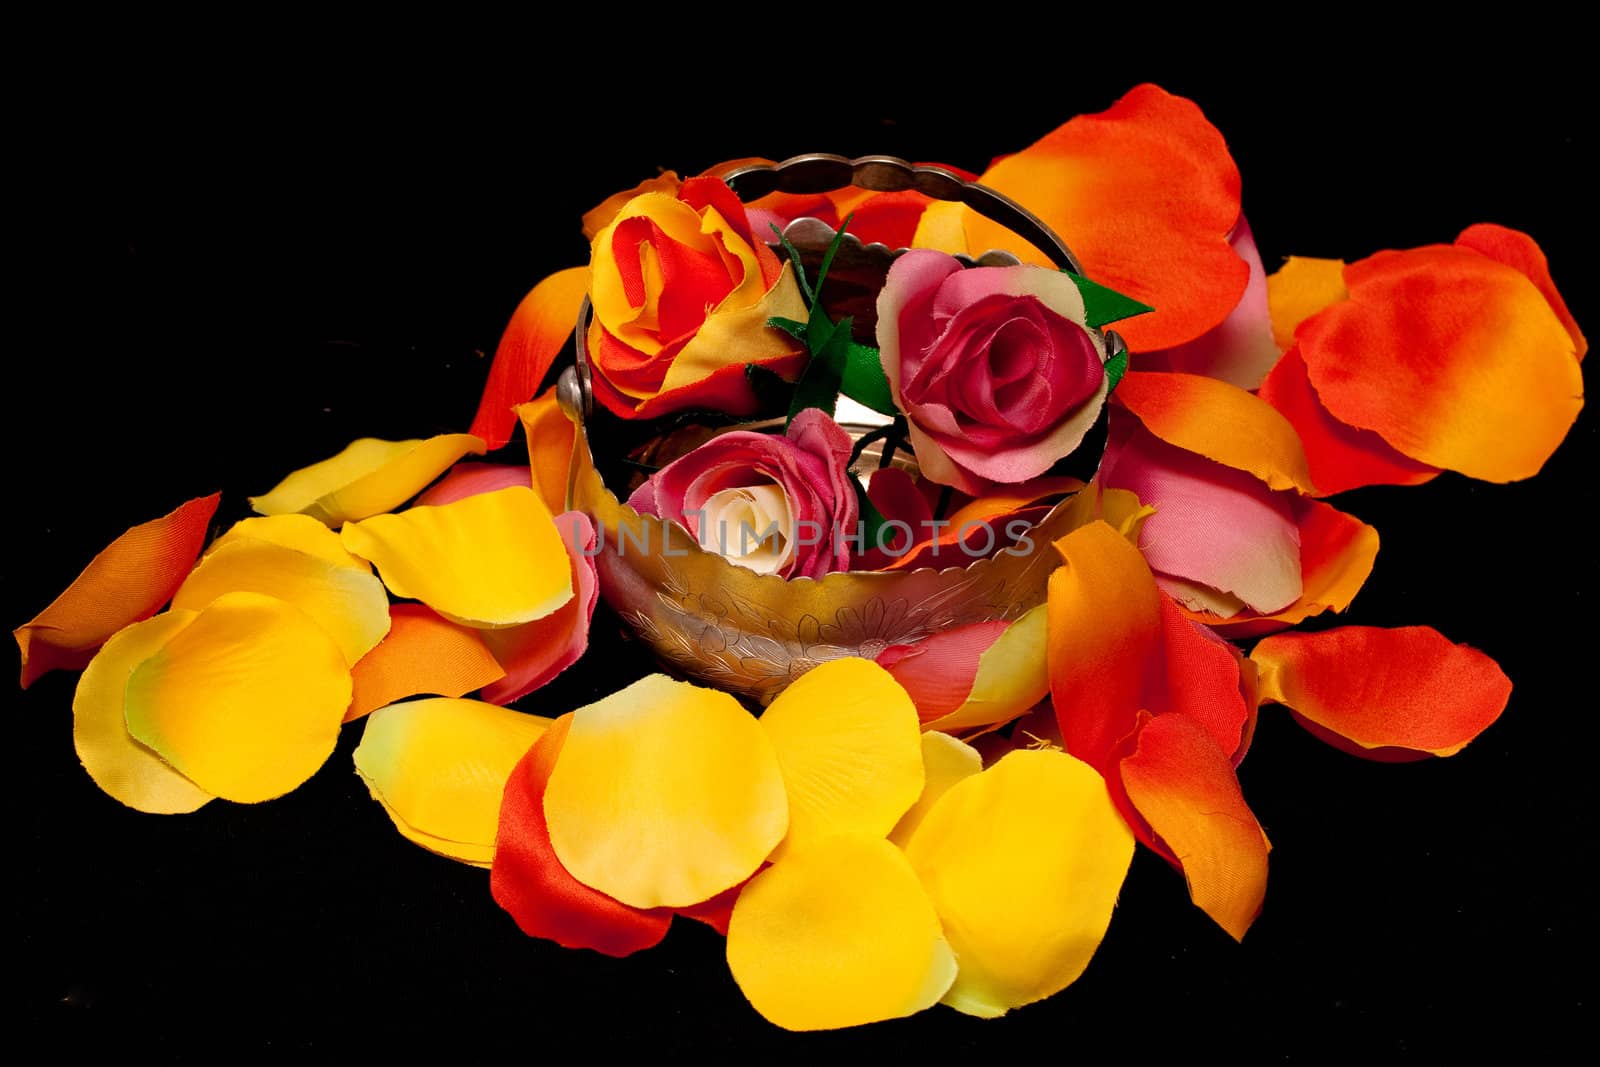 Silver basket with roses on rose textile petals by foaloce